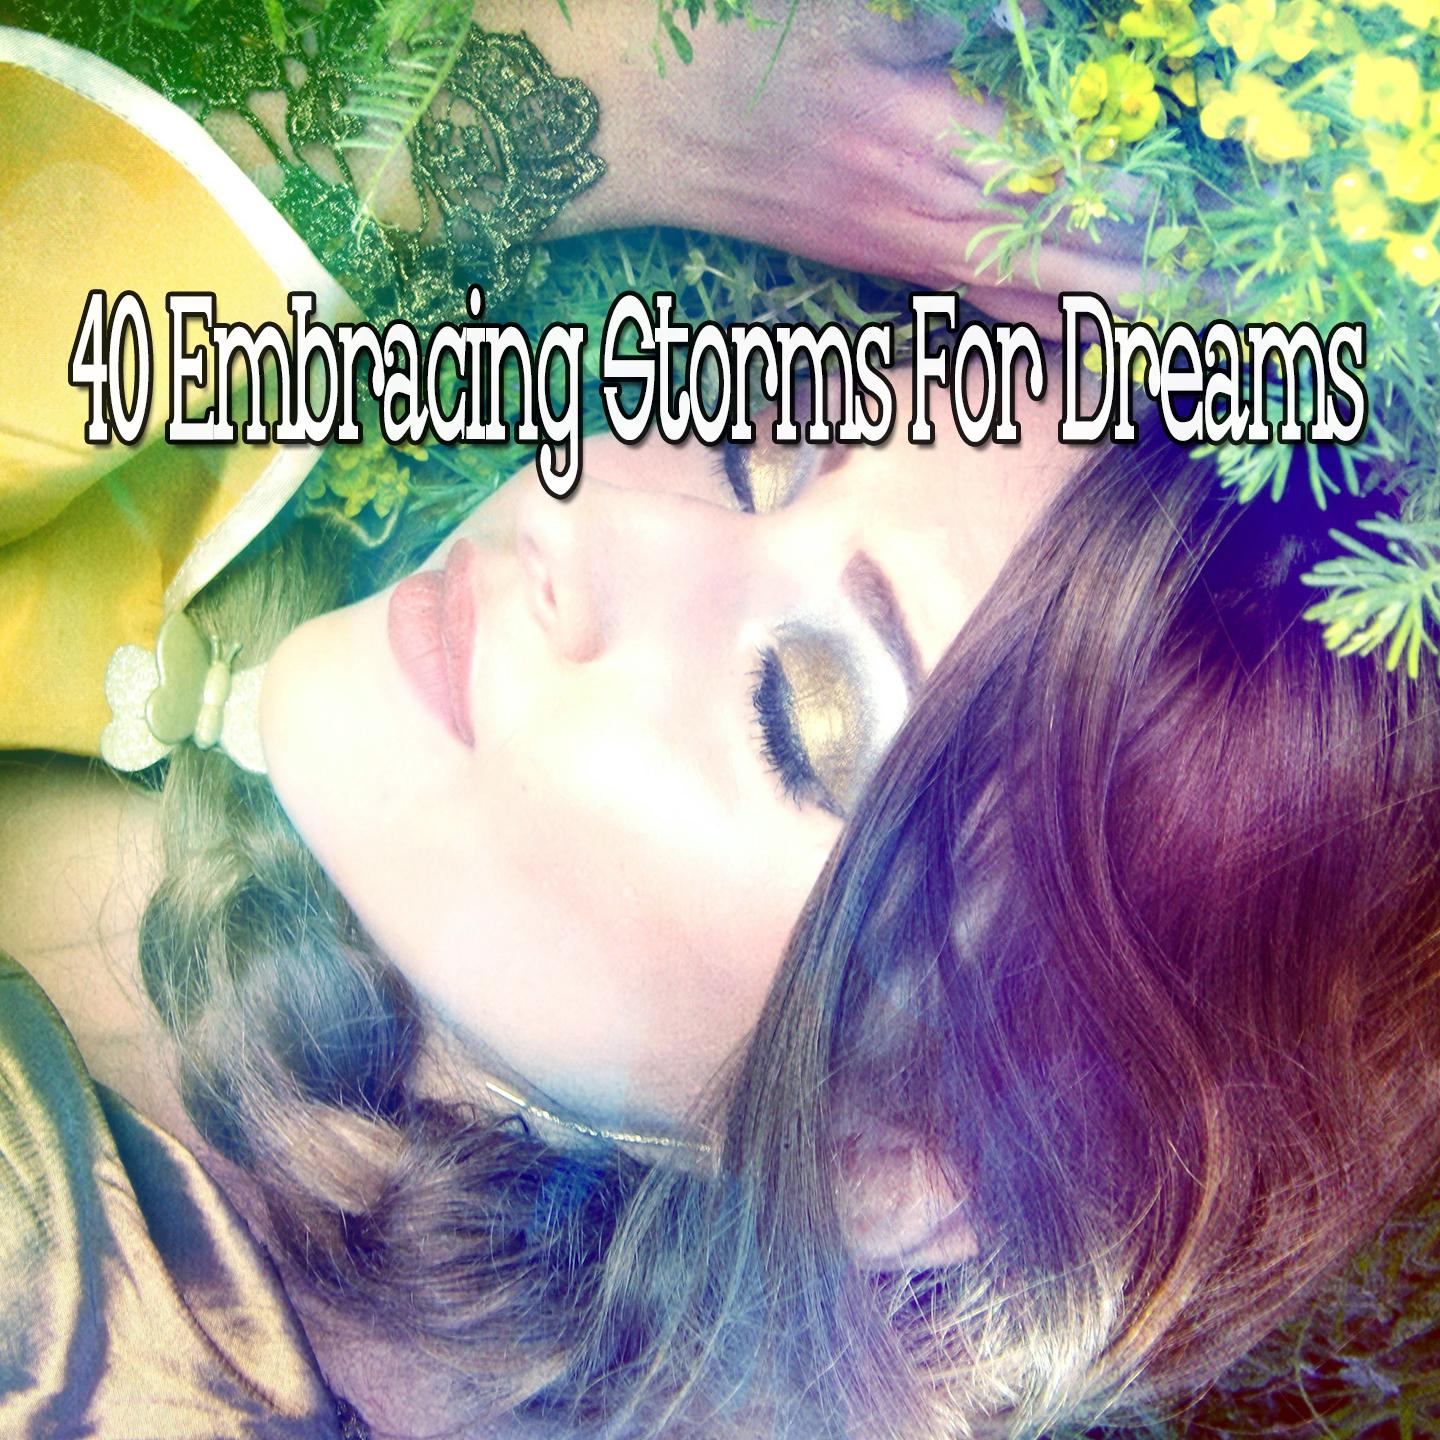 40 Embracing Storms for Dreams